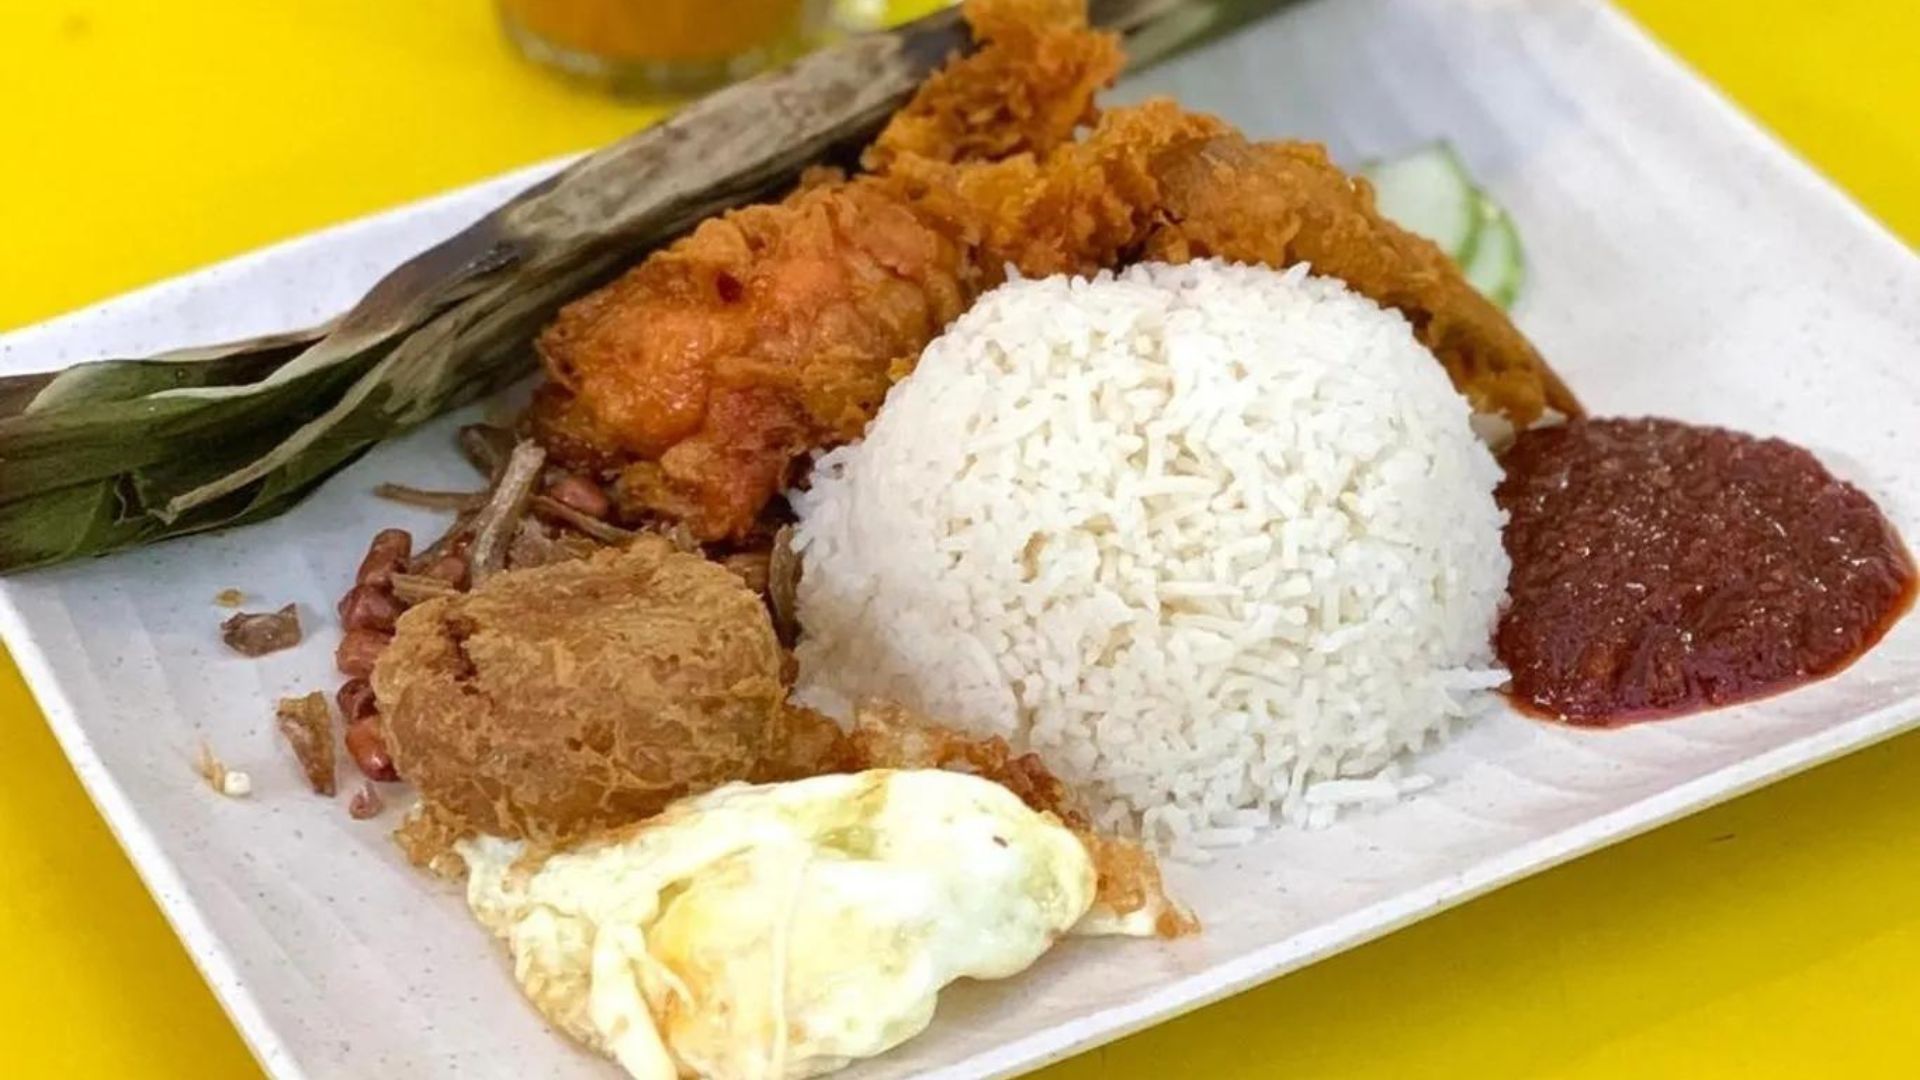 12 Hawker Stalls For The Best Food At Adam Road Food Centre, Singapore